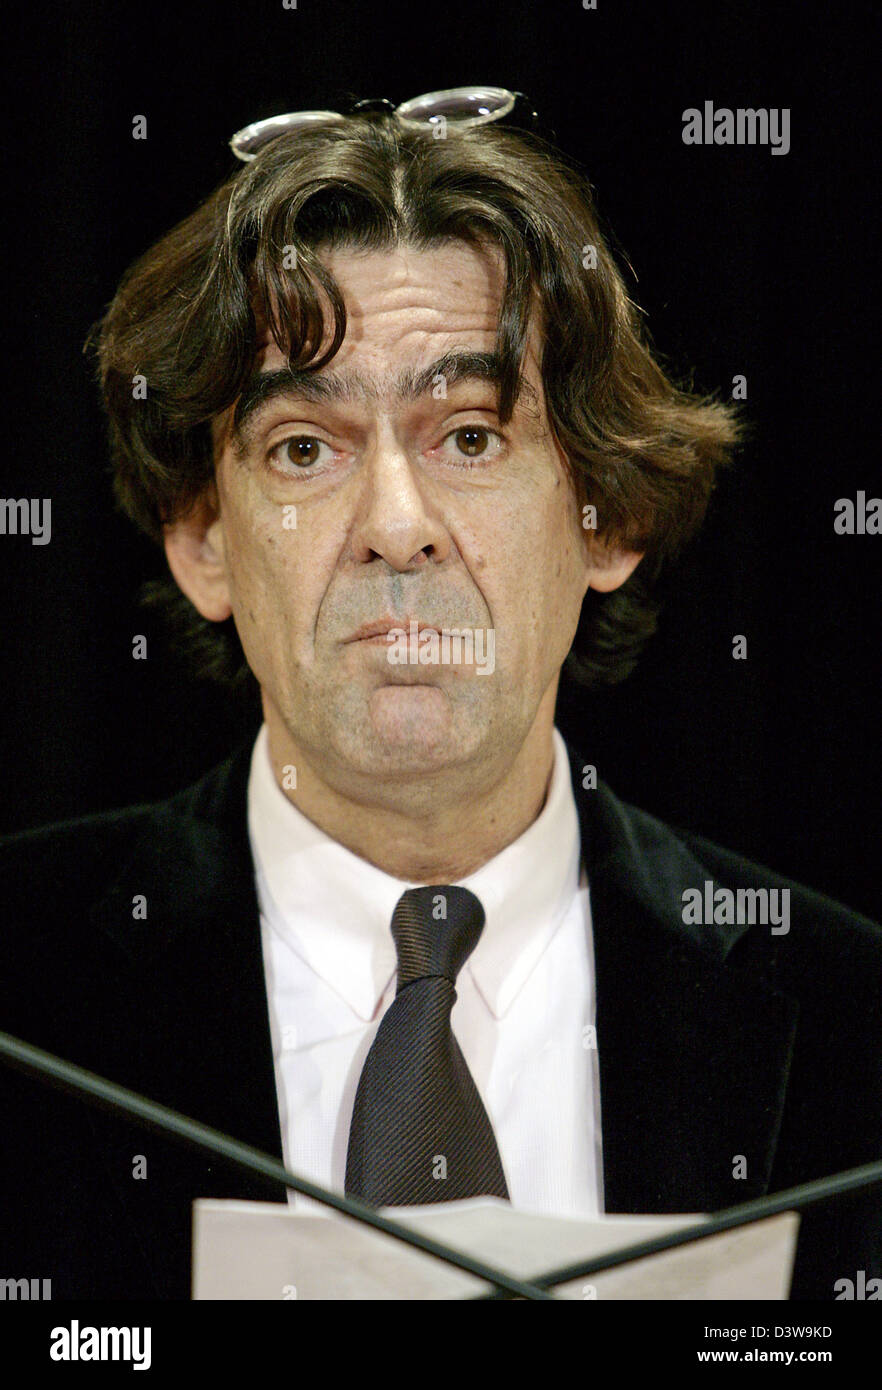 Luc Ferry, French intellectual and former French Minister for Education, shown at a lecture on the occasion of the 44th anniversary of the signing of the 'Elysee Treaties' on Franco-German friendship in Stuttgart, Germany, Tuesday, 23 January 2007. Photo: Marijan Murat Stock Photo